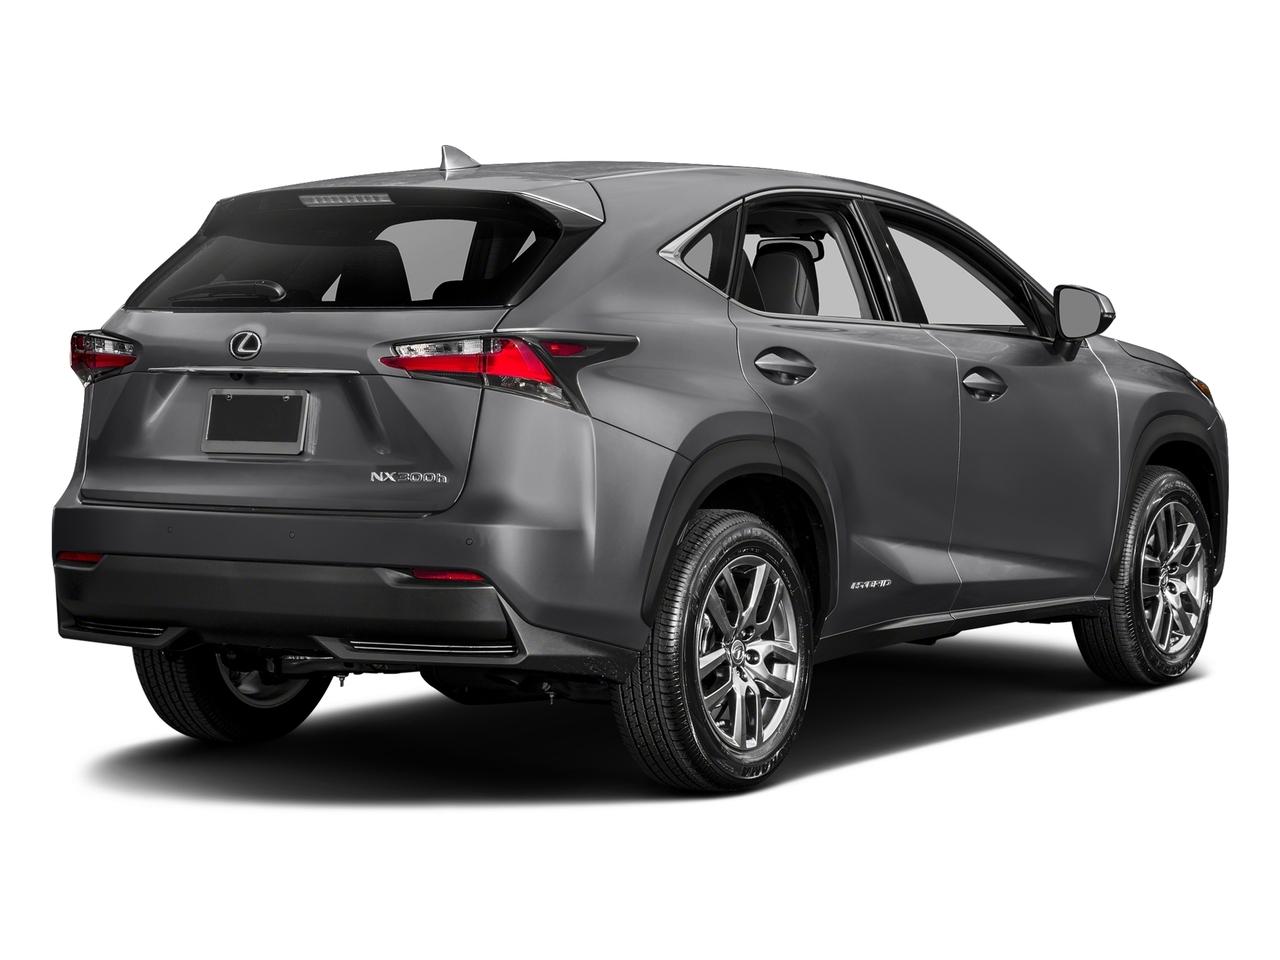 Used 2017 Lexus NX 300h (Nebula Gray Pearl) for Sale in